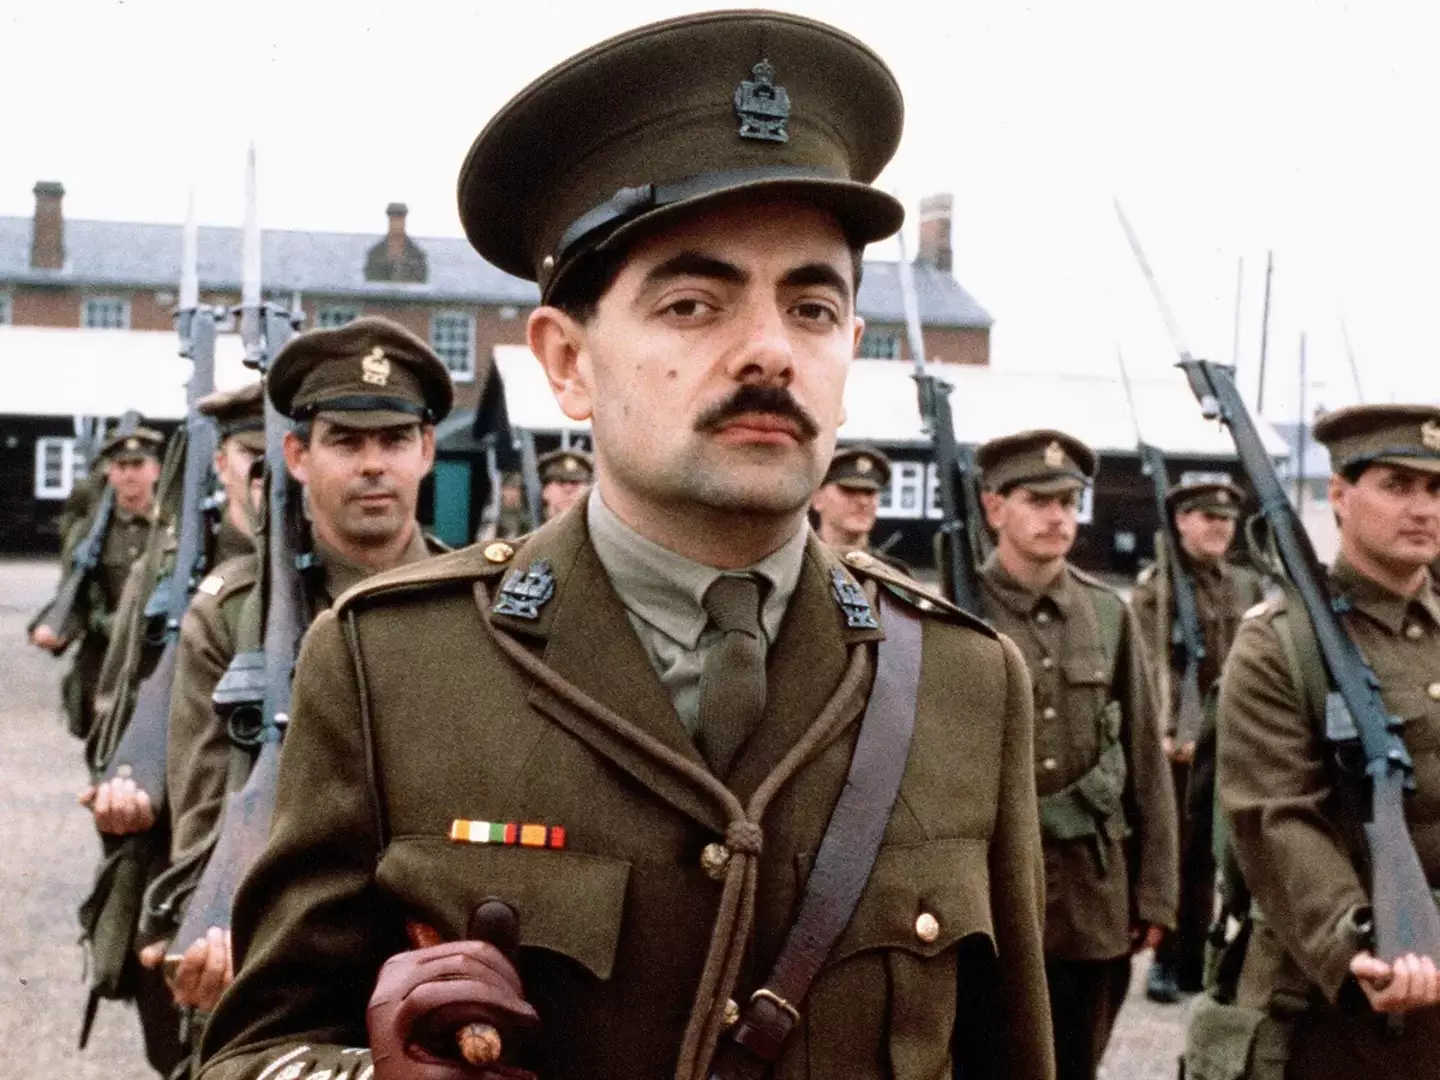 It's not clear whether Rowan Atkinson will be back.